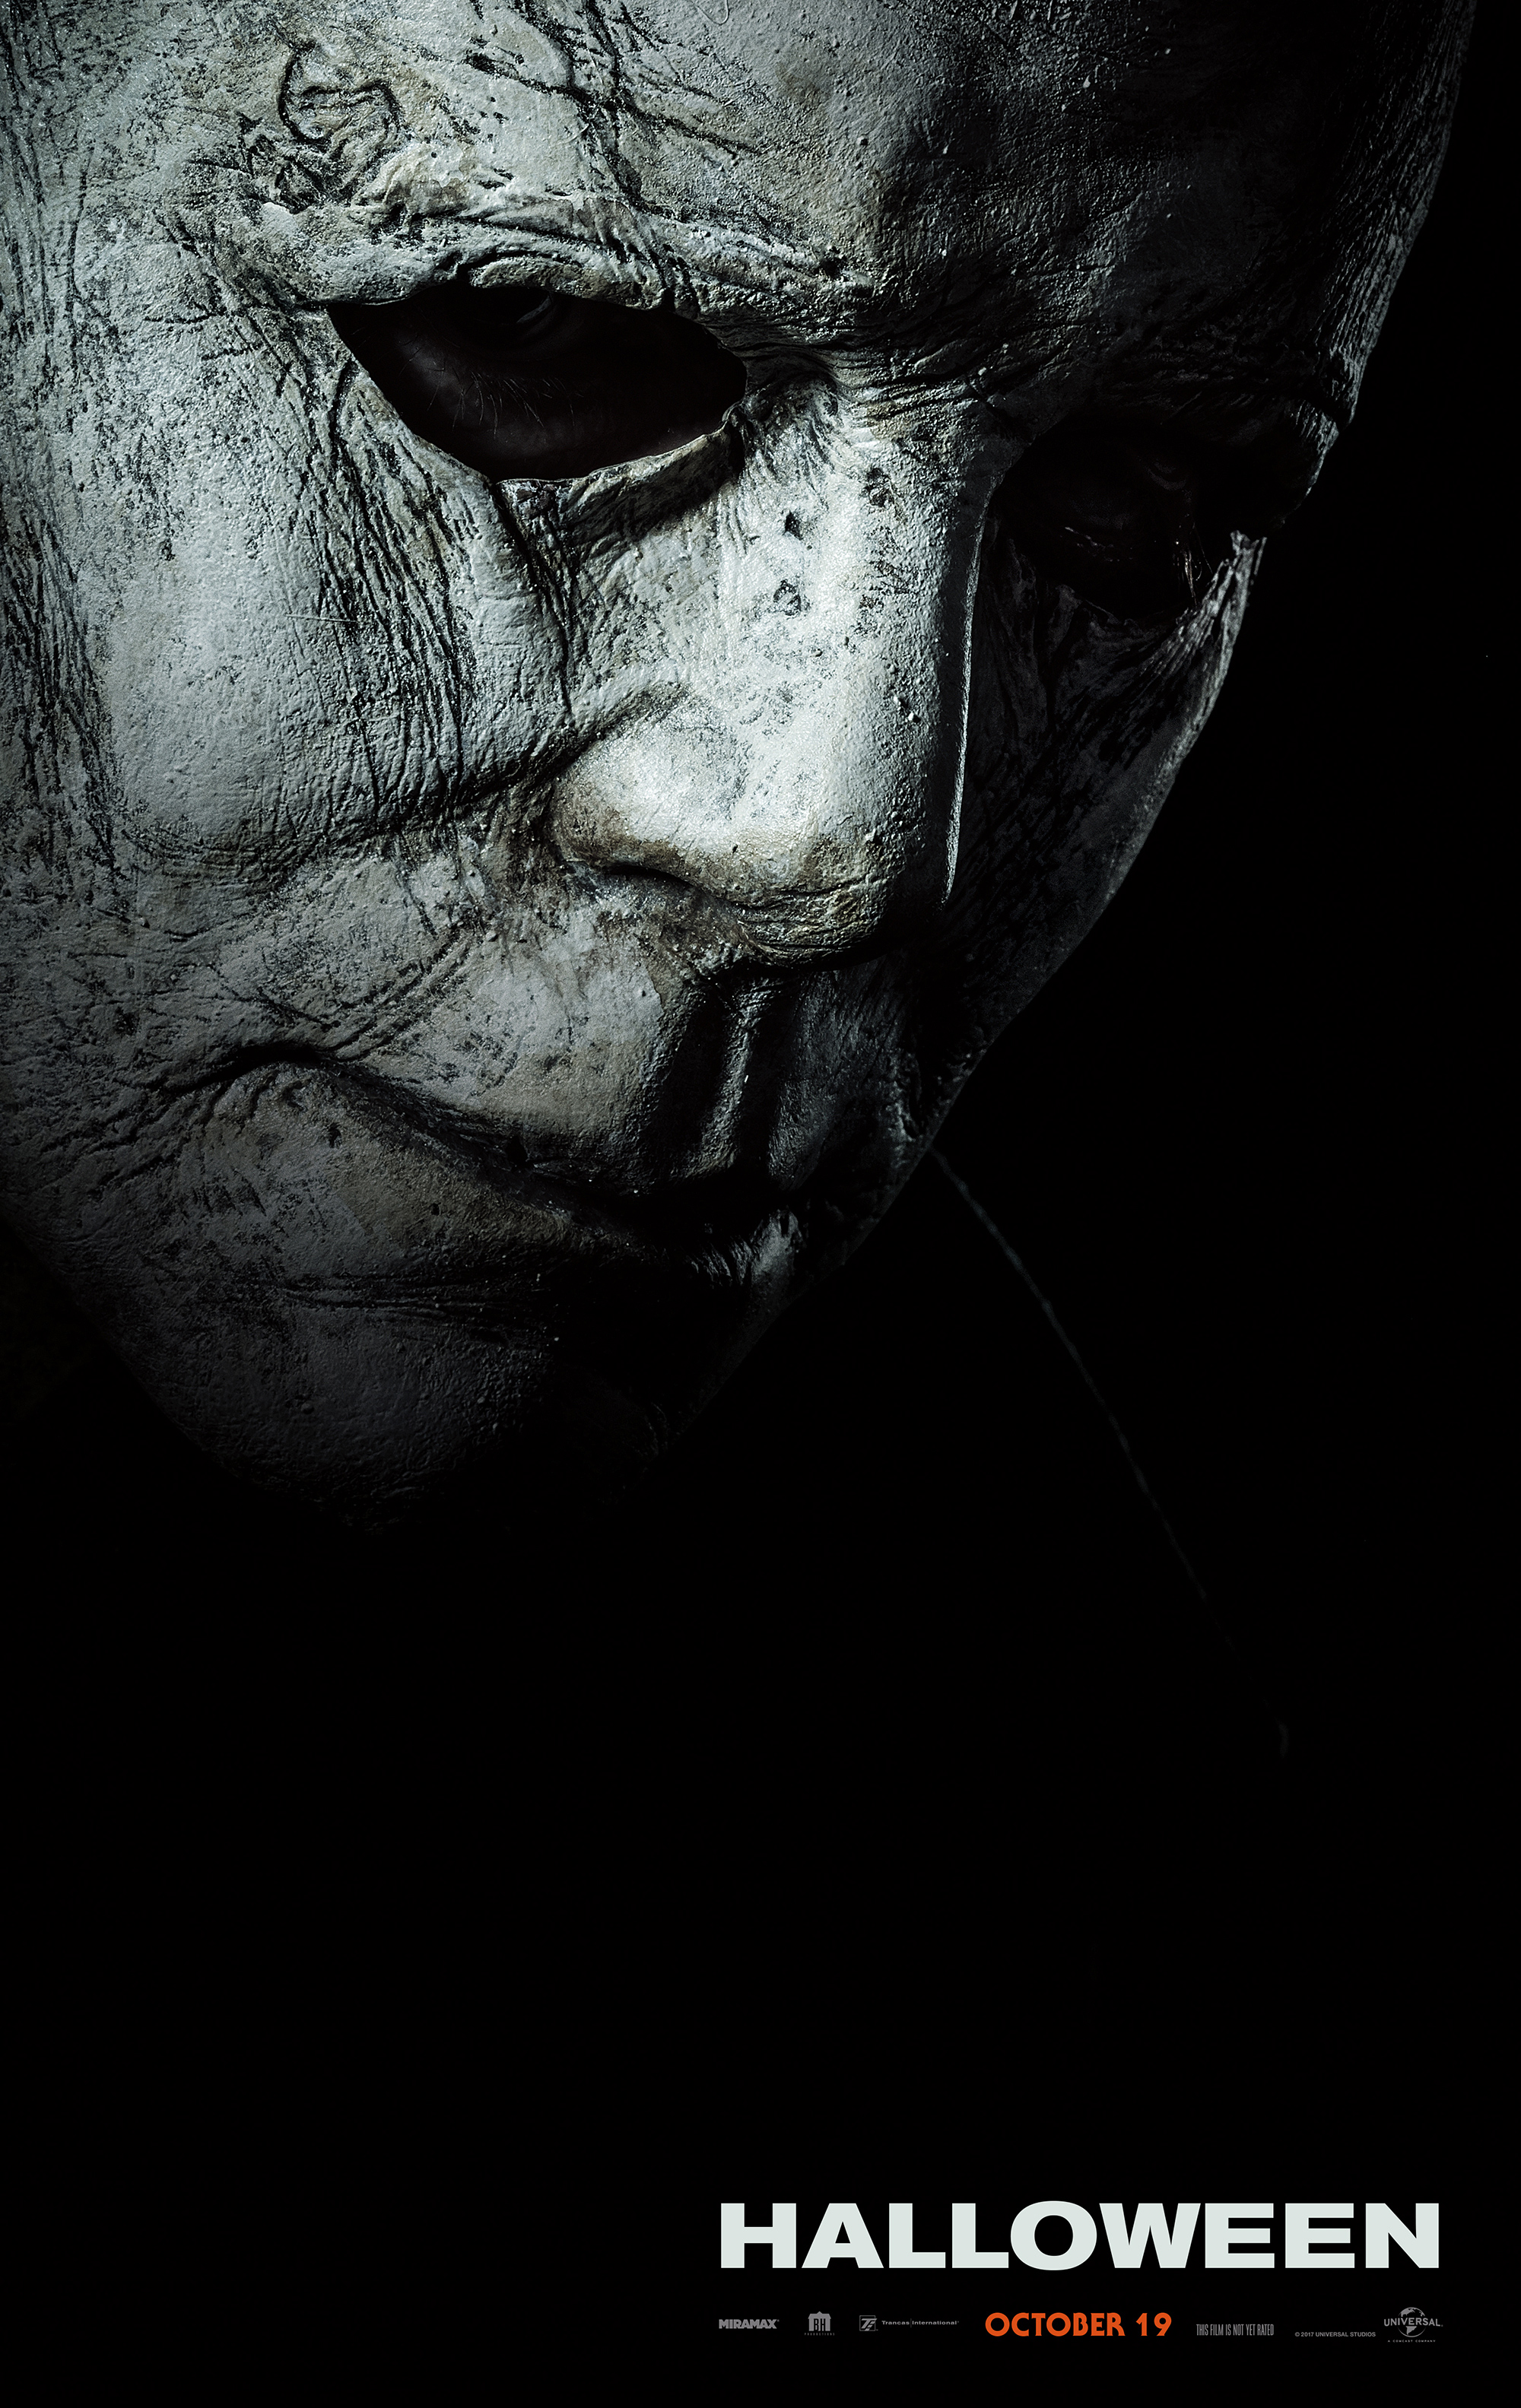 Halloween film review TIFF 2018: Michael Myers is back with a bang